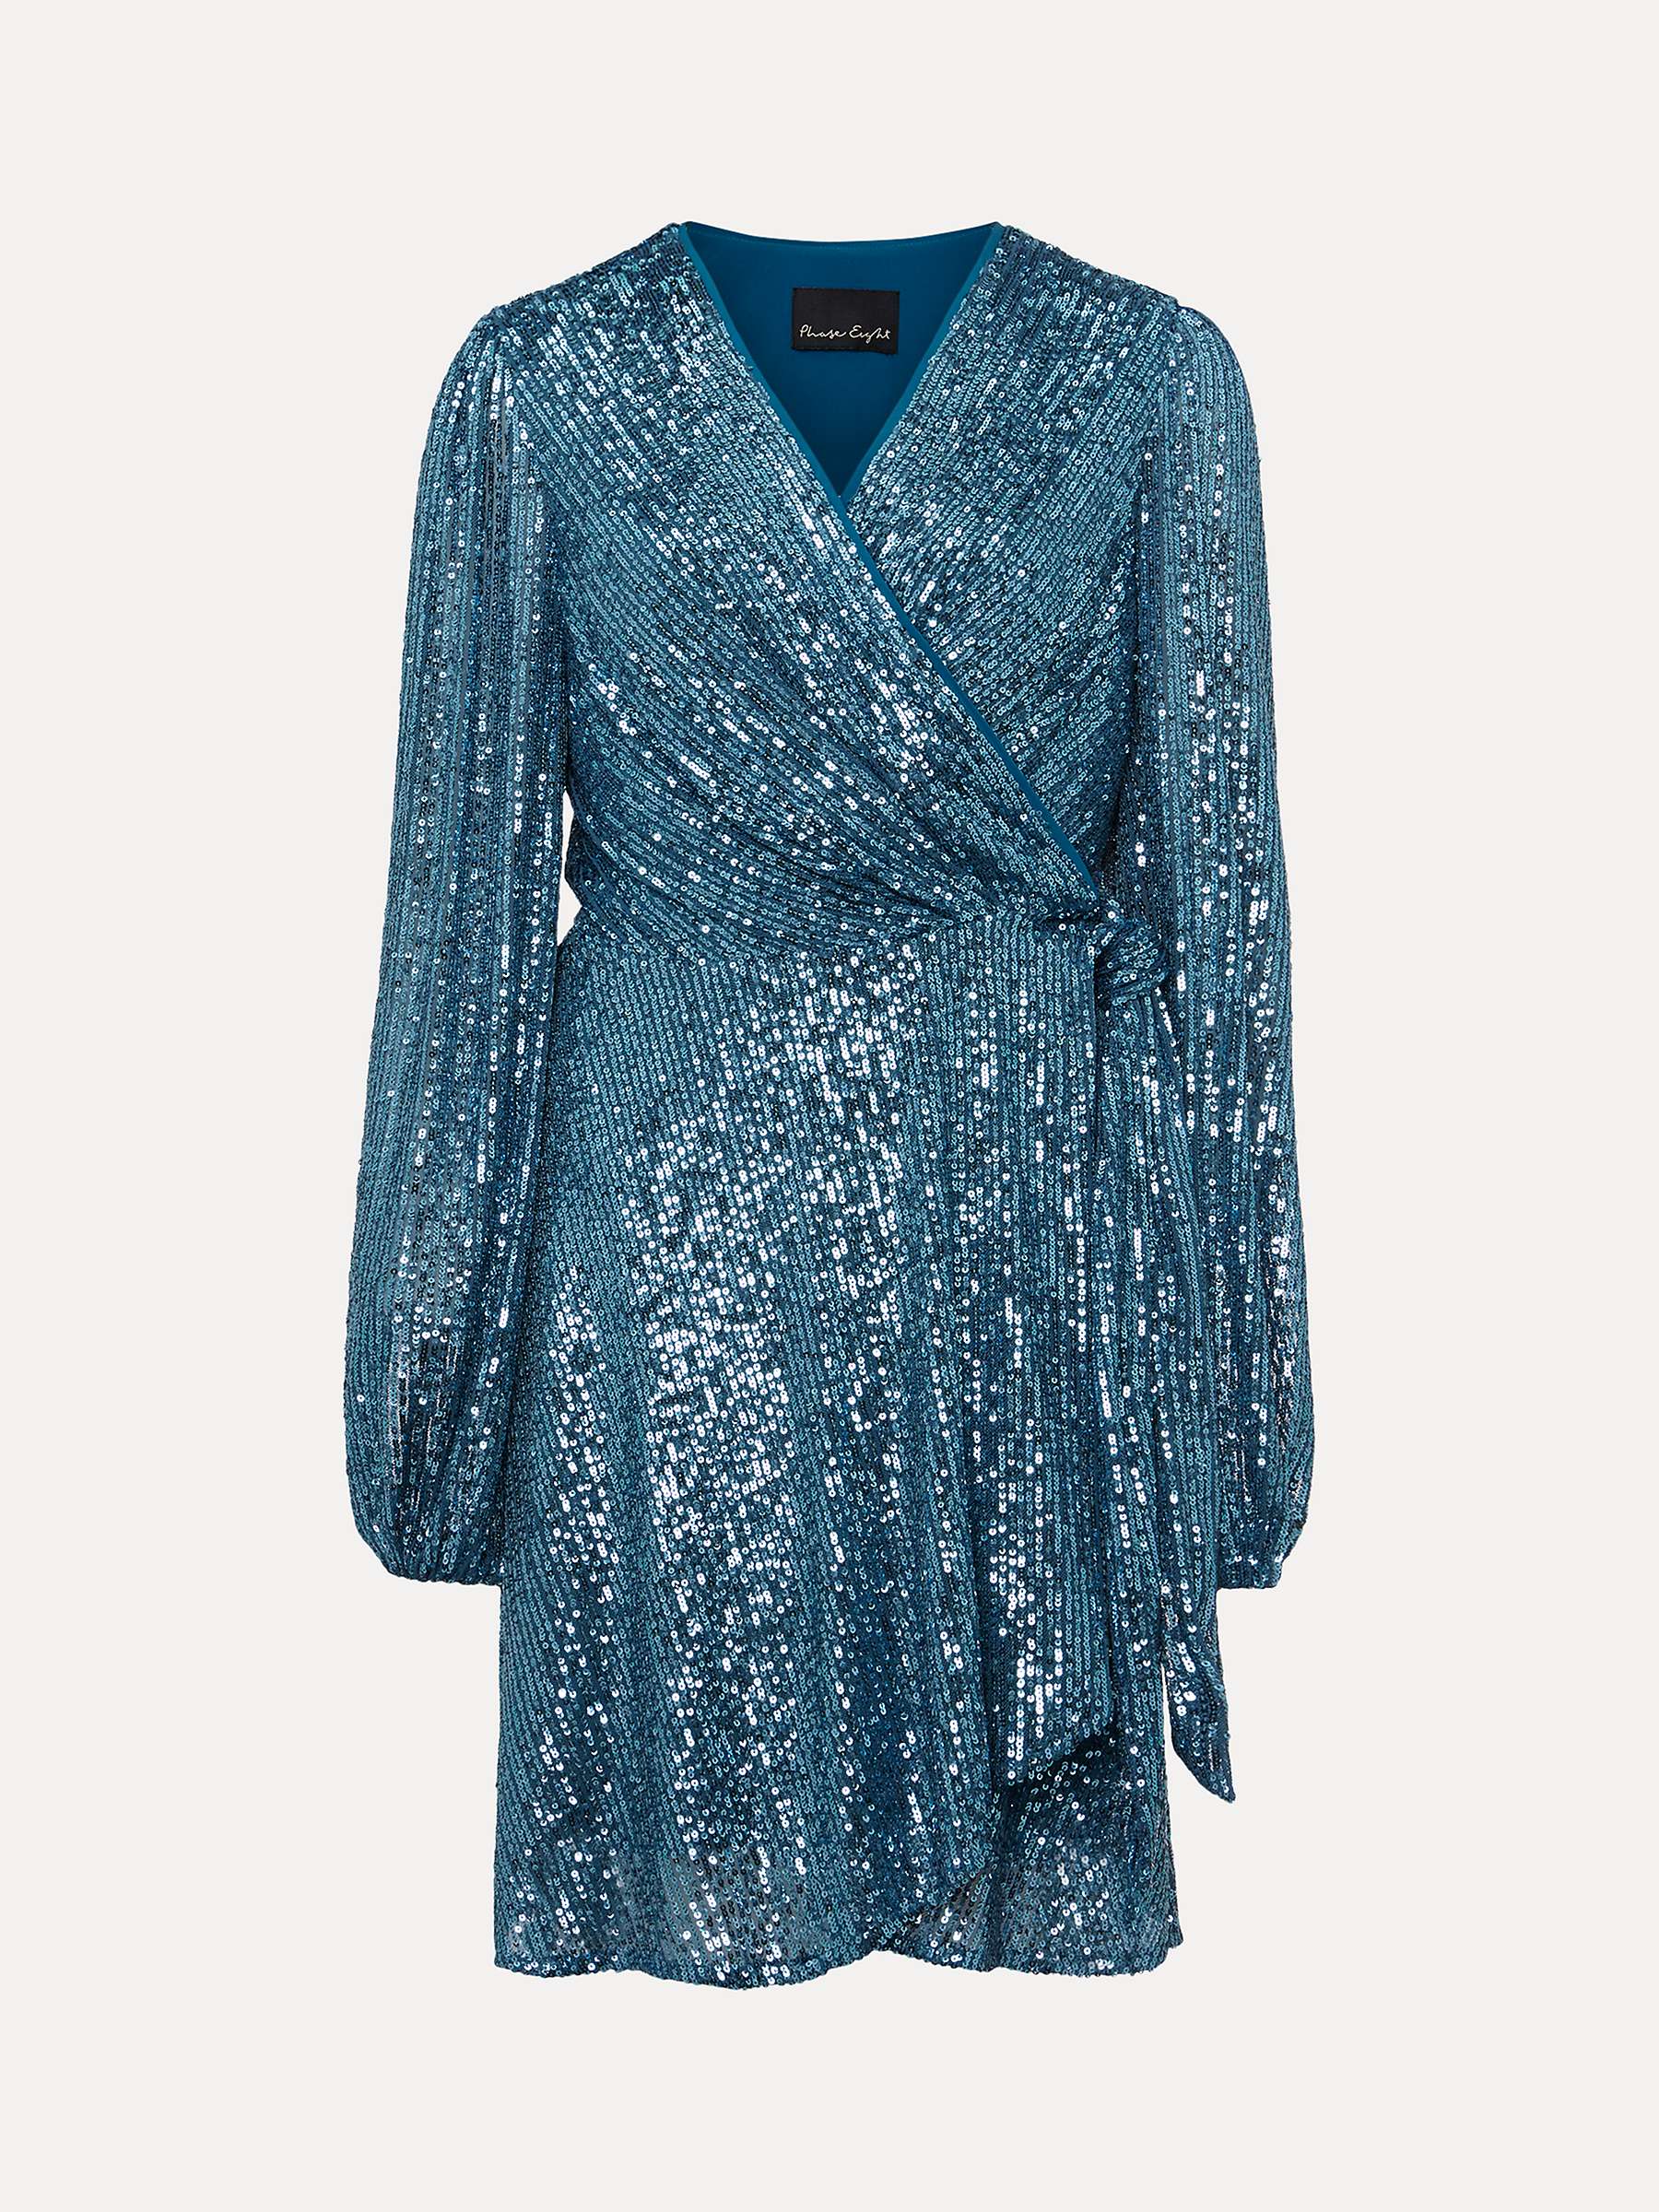 Buy Phase Eight Carissa Sequin Wrap Mini Dress, Teal Online at johnlewis.com